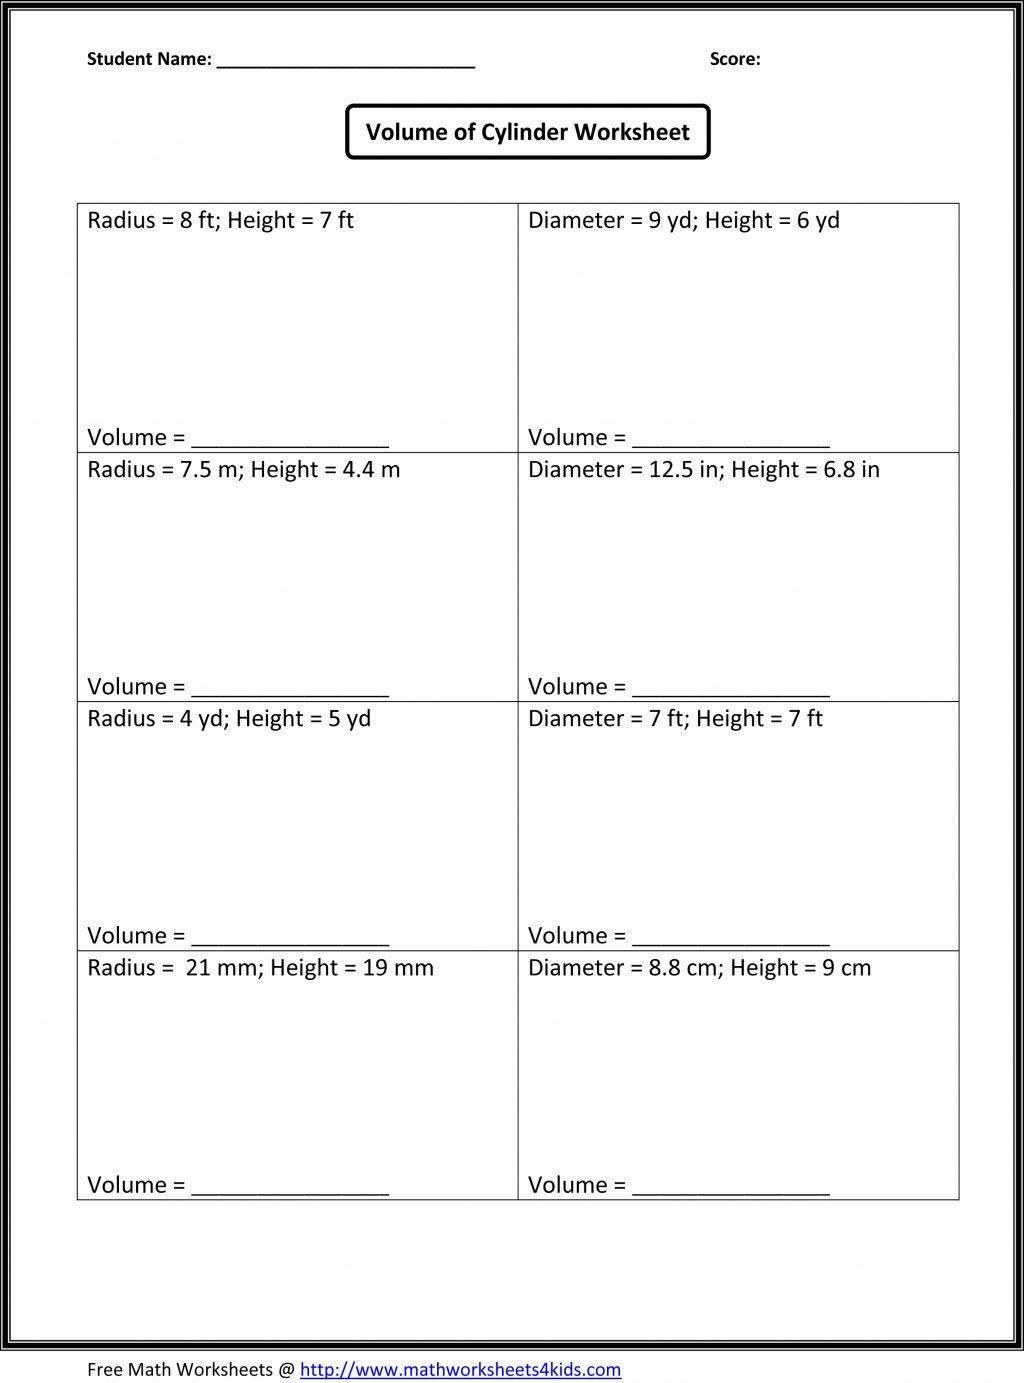 worksheet-ideas-common-core-math-grade-worksheets-with-db-excel